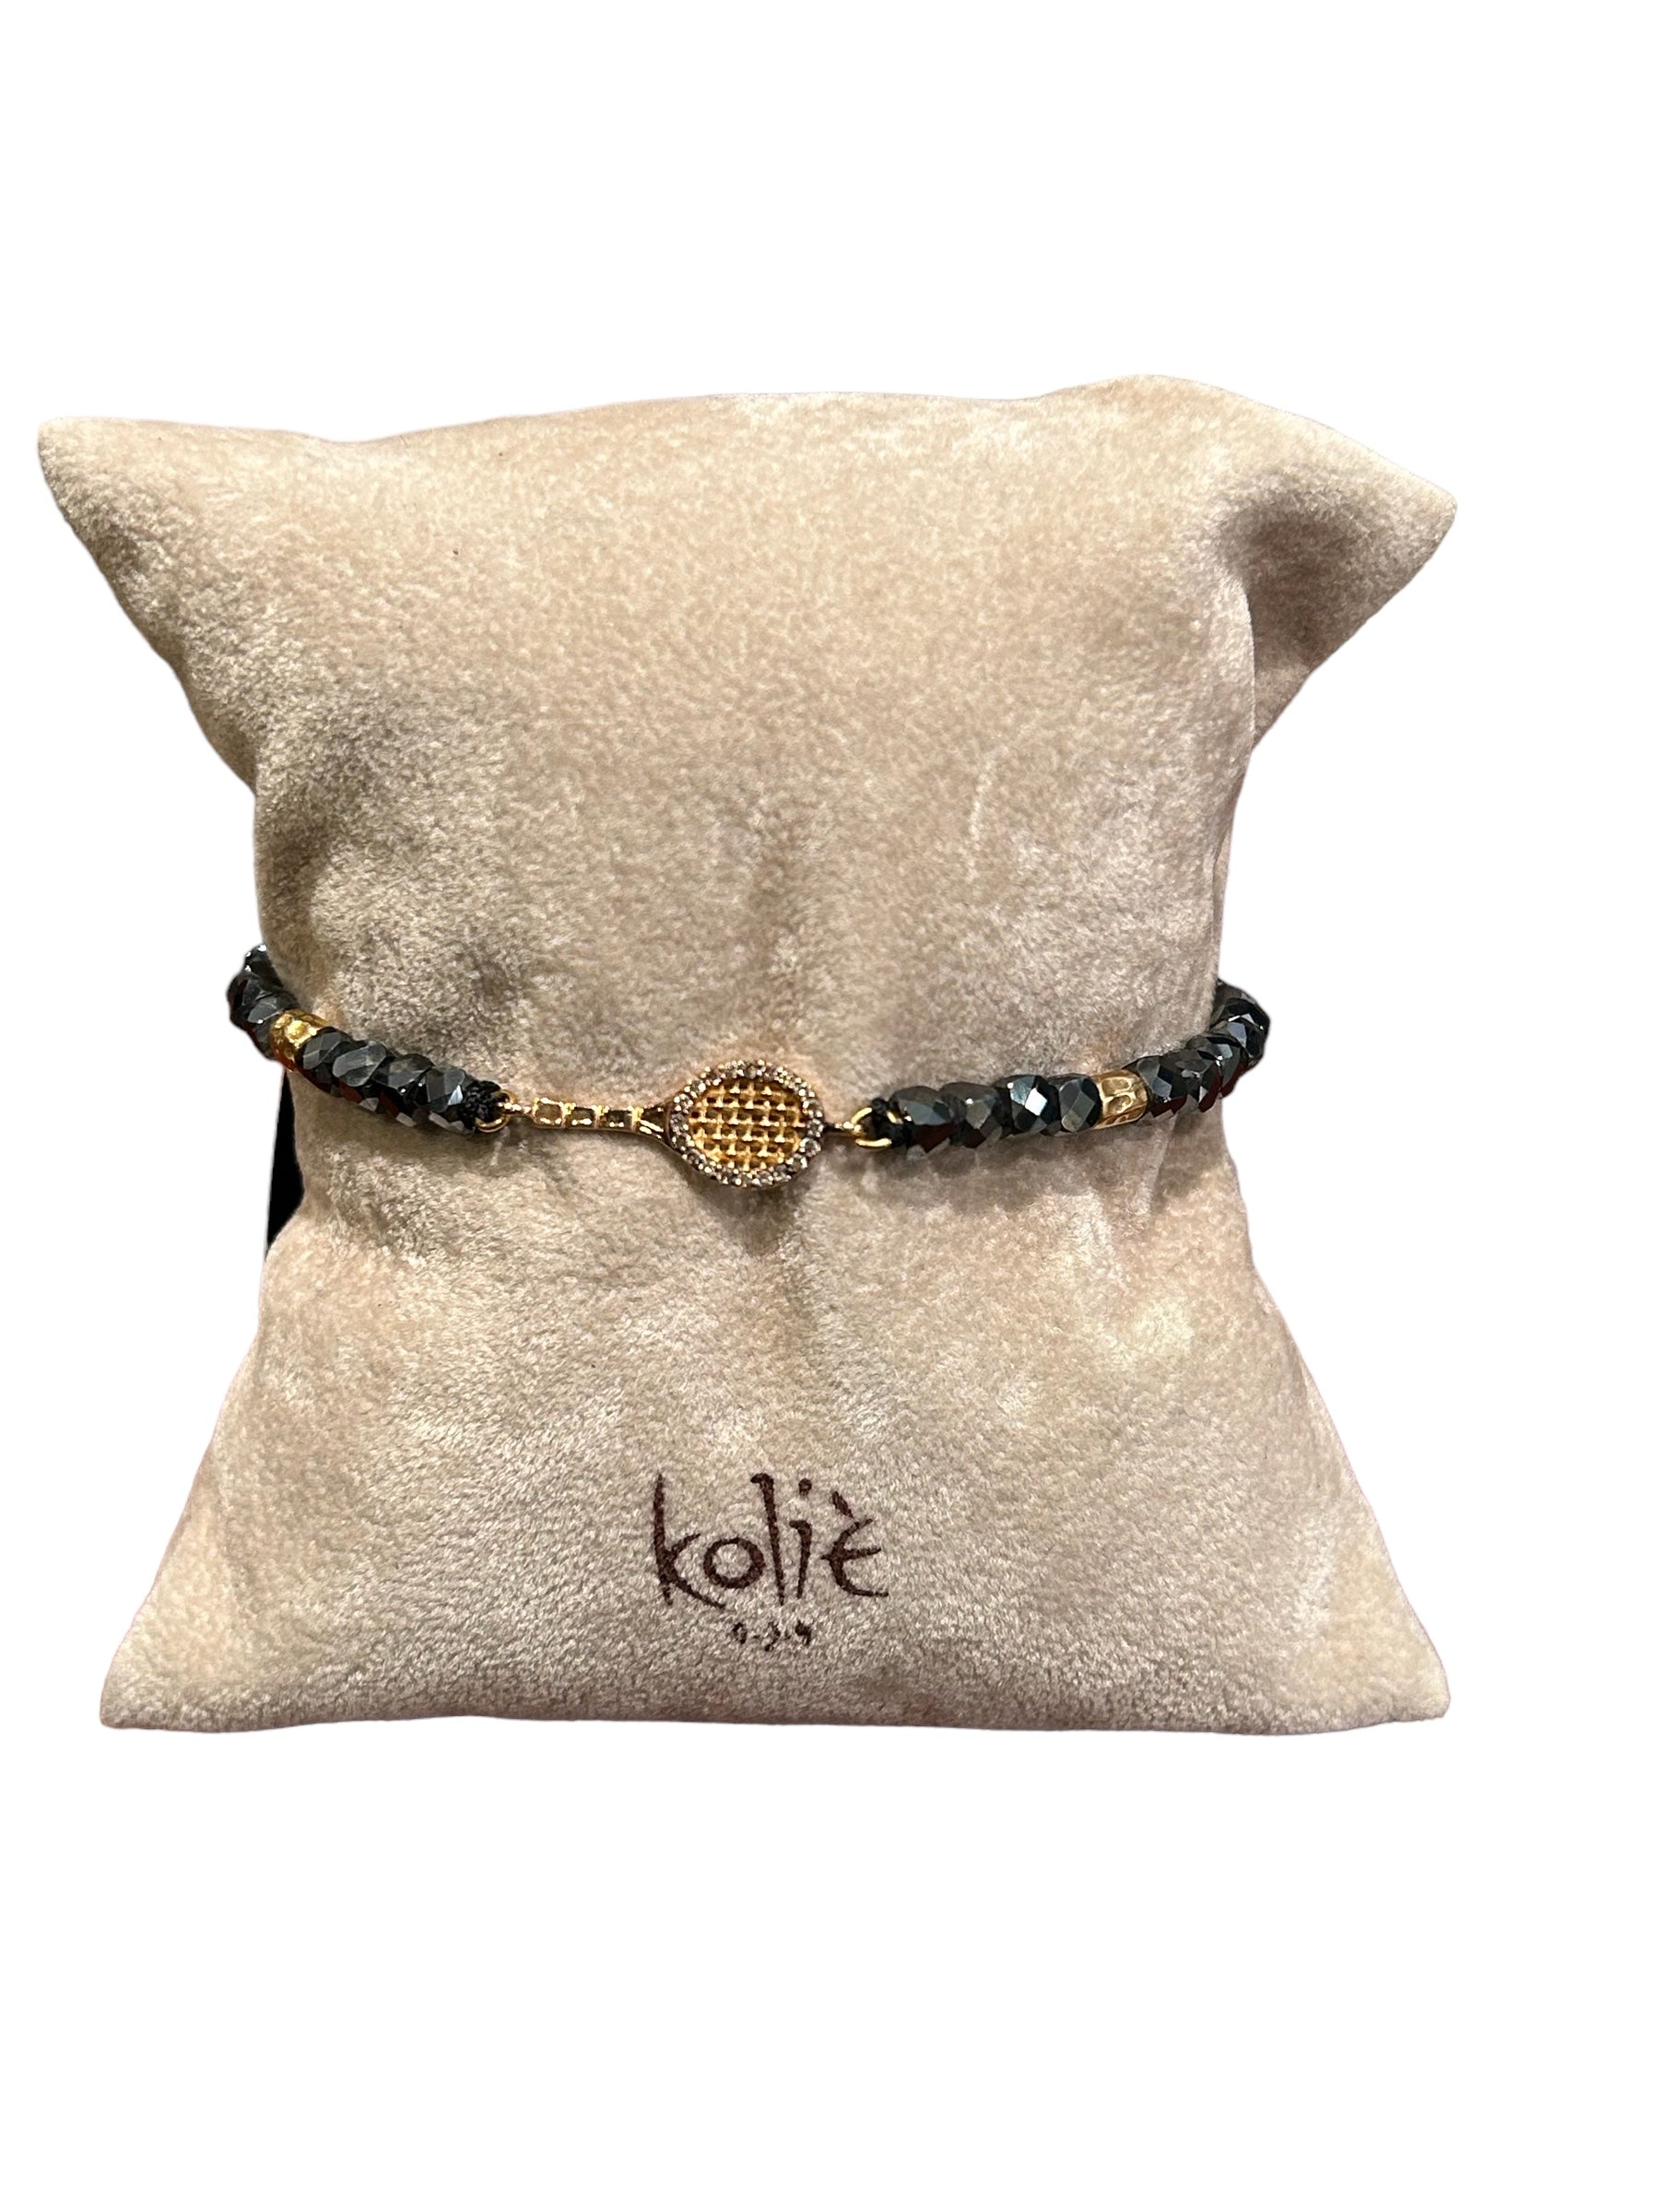 Kolie 925 - Bracelet in hematite and 18kt rose gold and brown diamonds - BR ACE KR CH